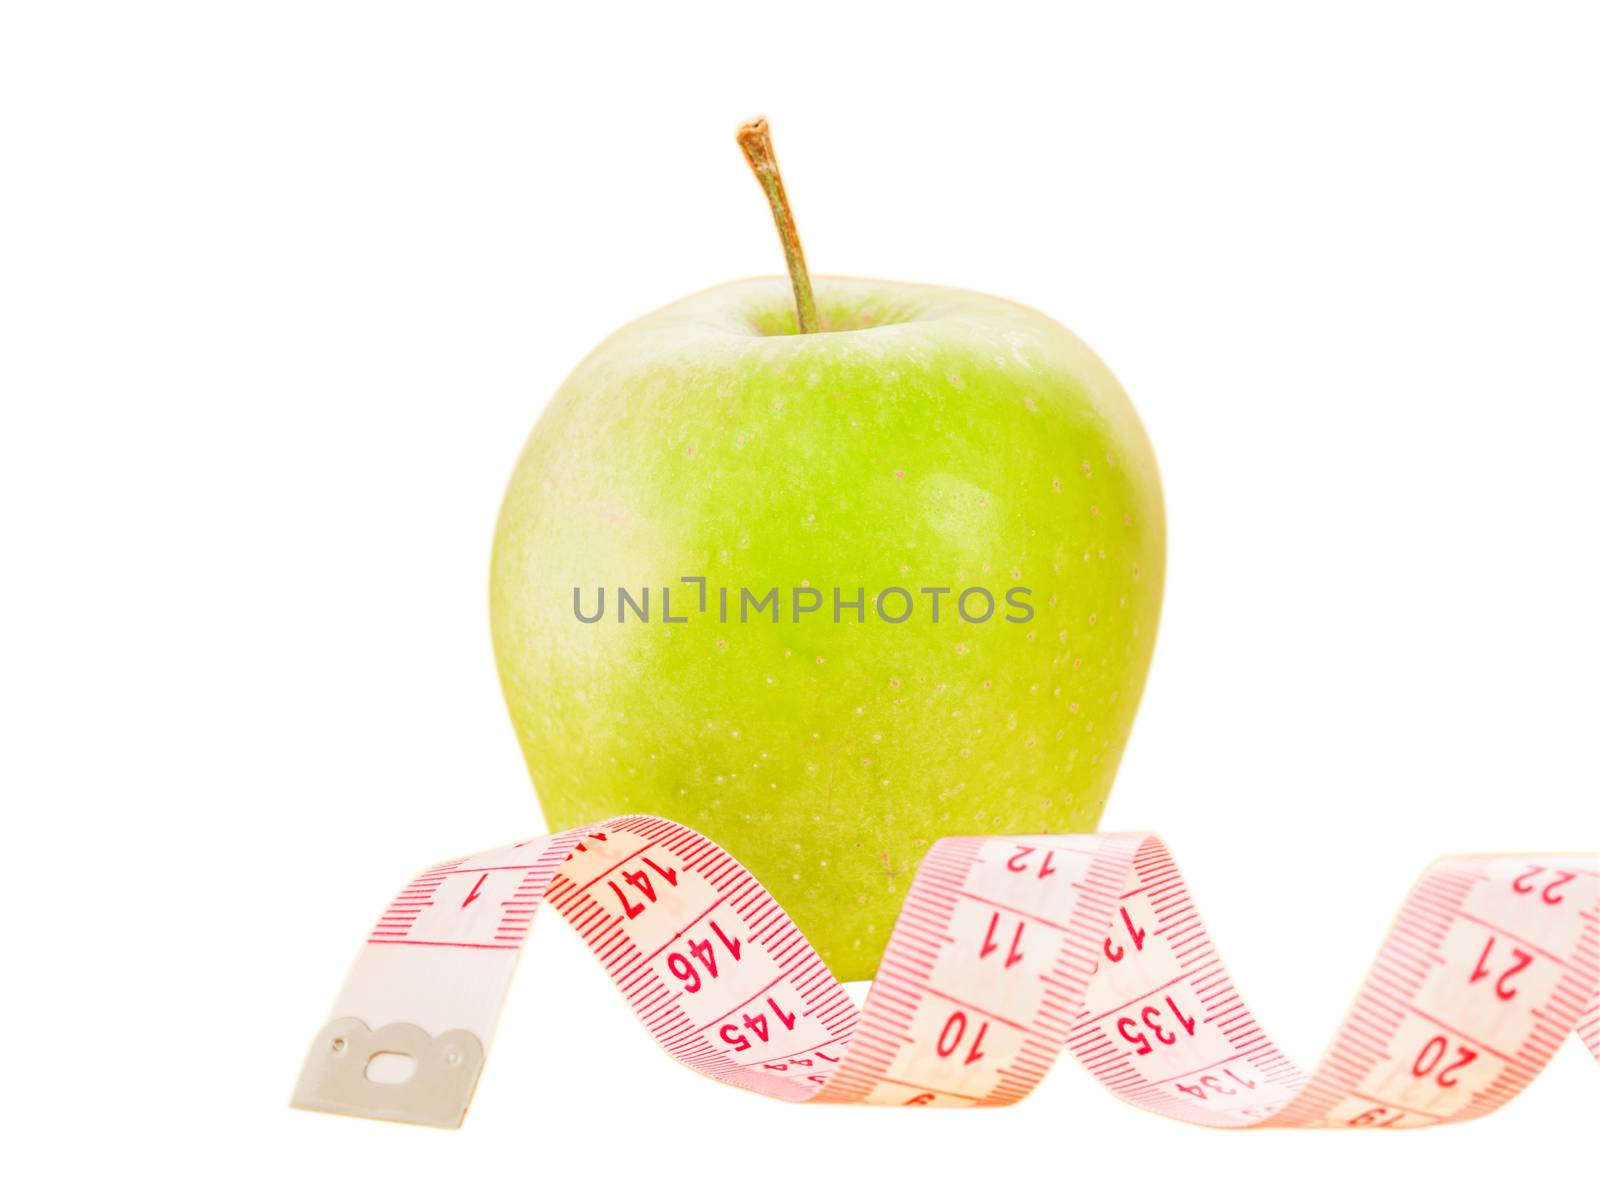 Measuring tape and green apple as a symbol of diet by fascinadora